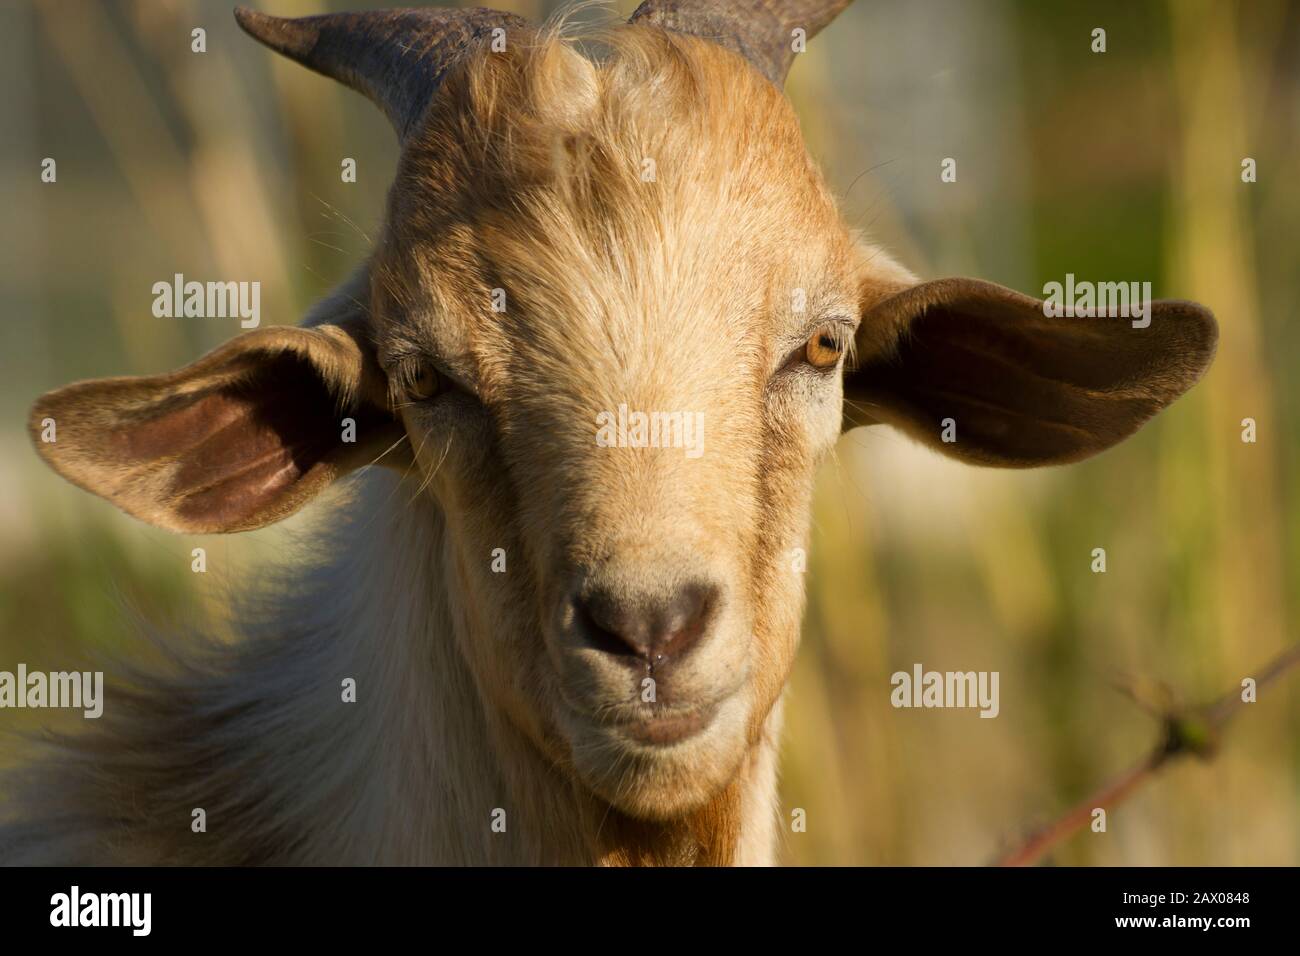 white yellowish domestic goat head close up in blurred natural background Stock Photo